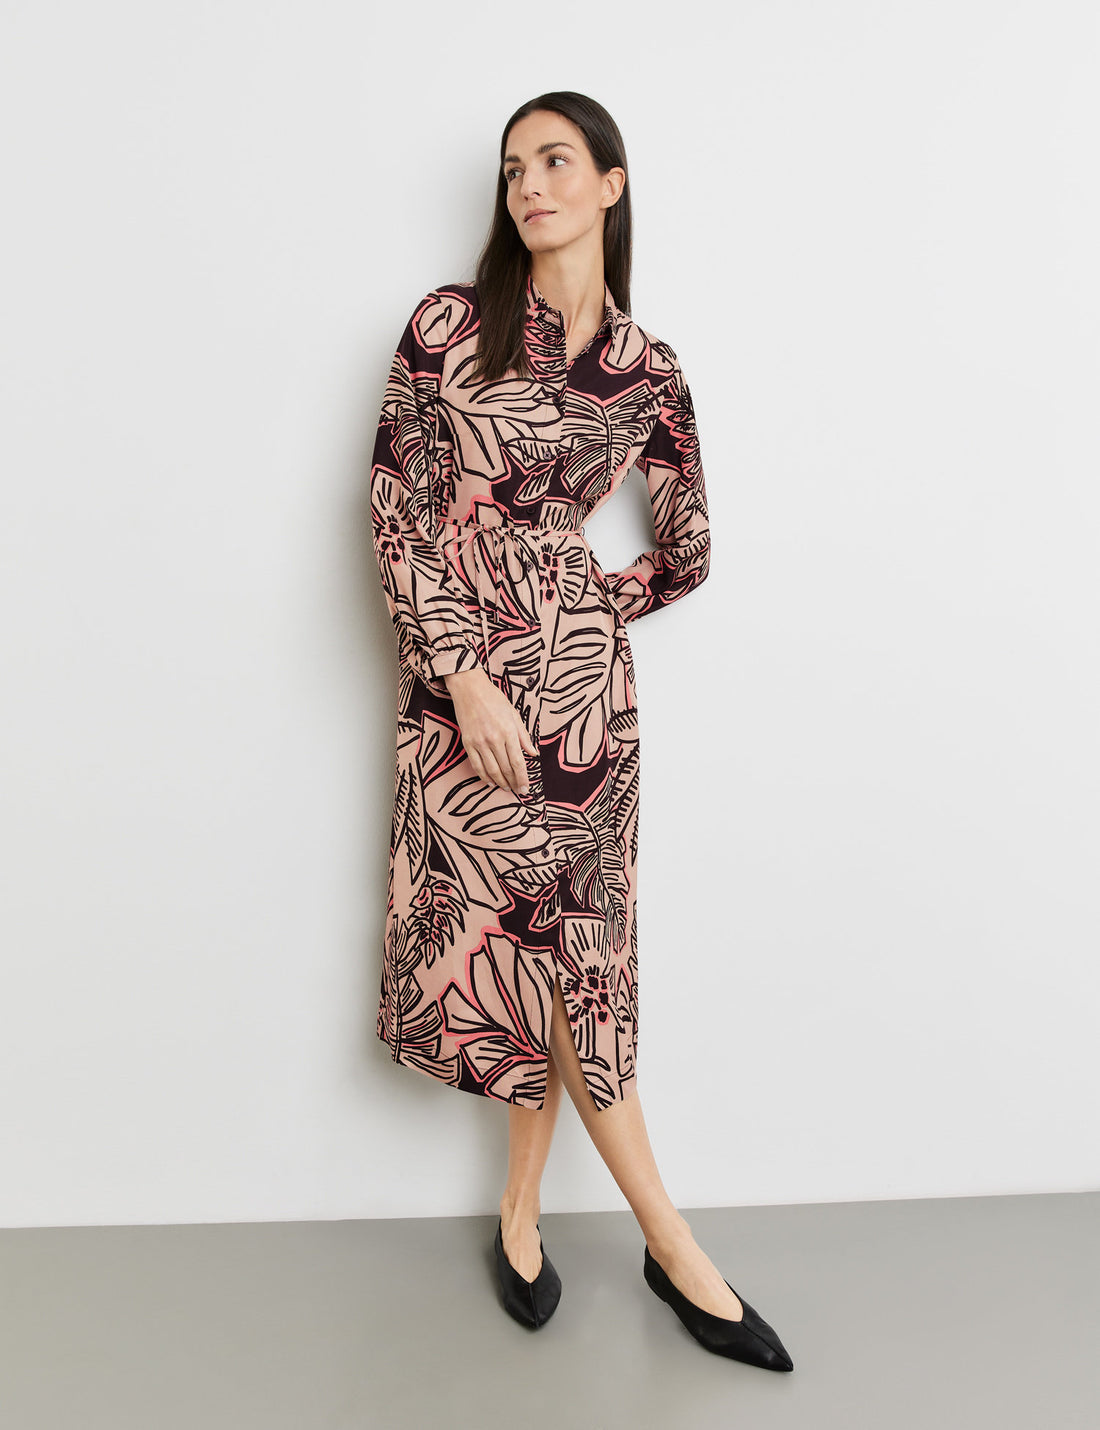 Patterned Blouse Dress With A Waistband_380001-31500_9018_01